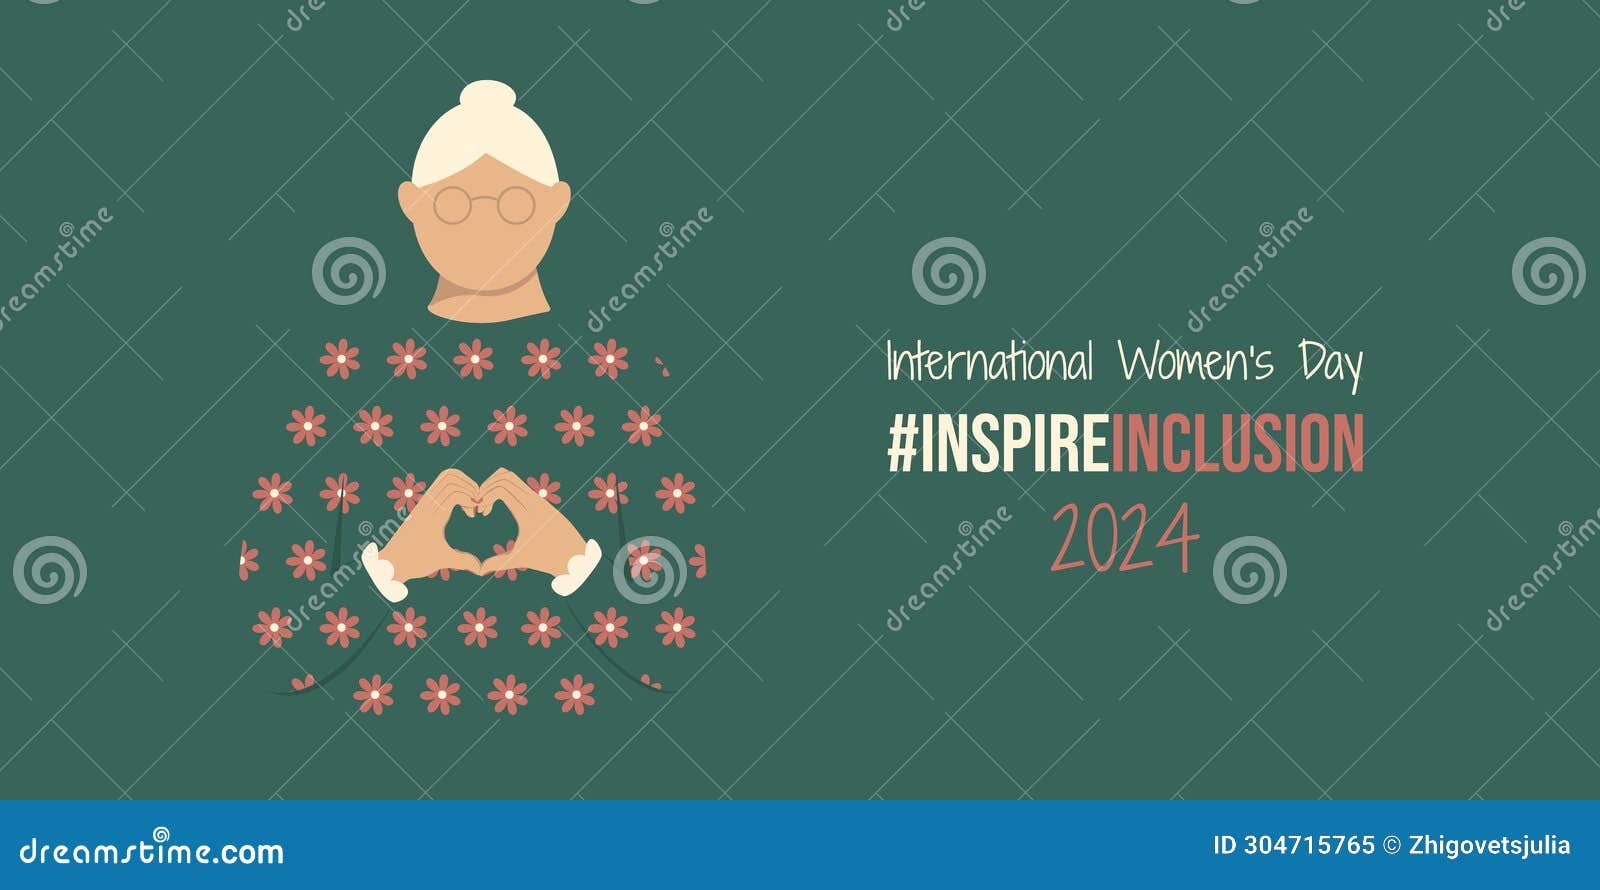 old lady on international women's day 2024 banner. iwd inspireinclusion horizontal  with woman shows heart 